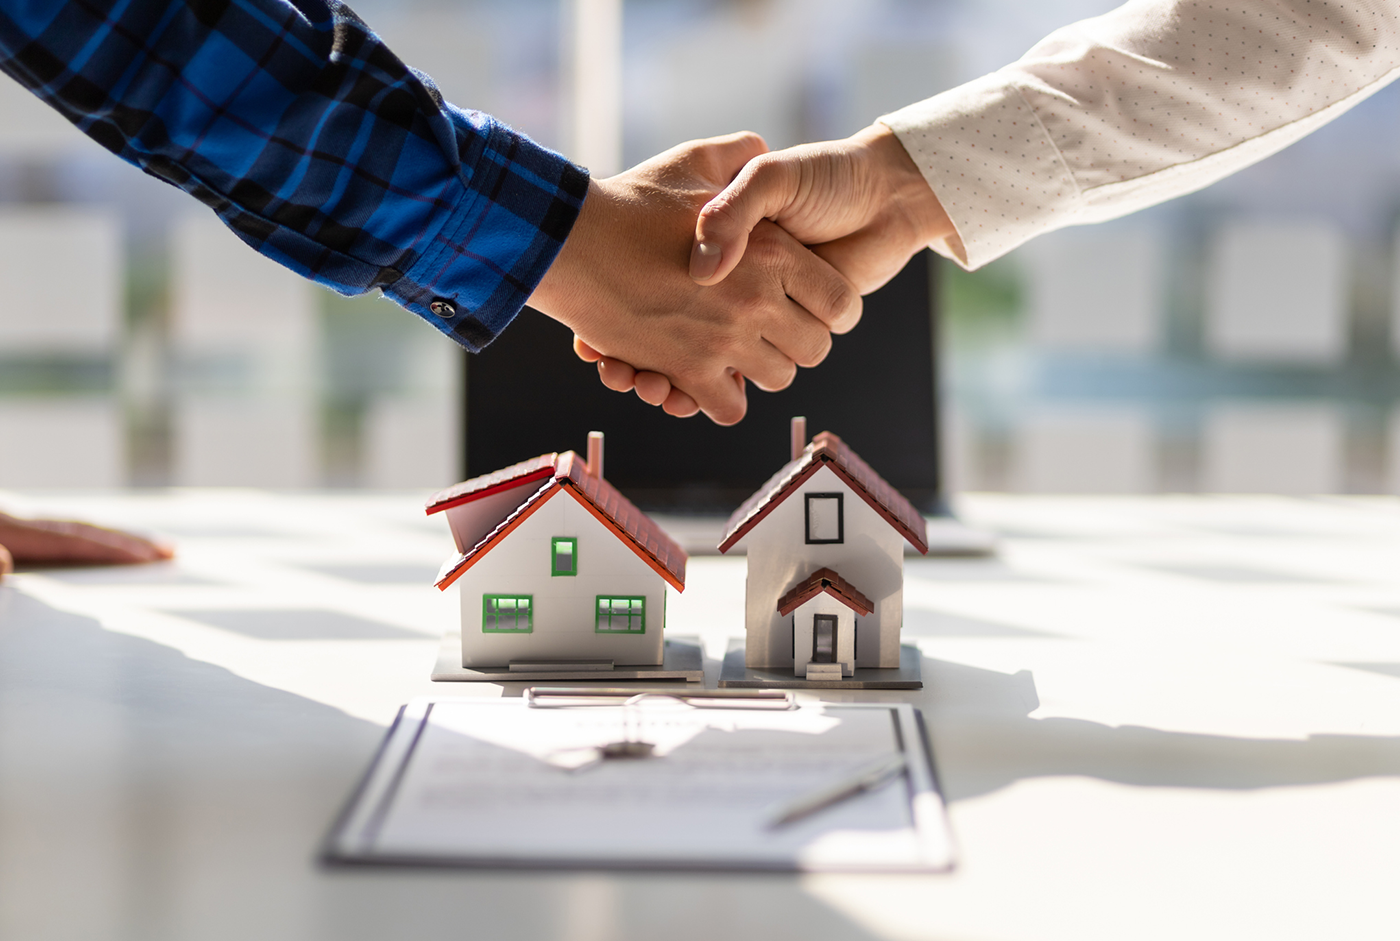 Contractor and homeowner shaking hands over a miniature model house and remodel contract